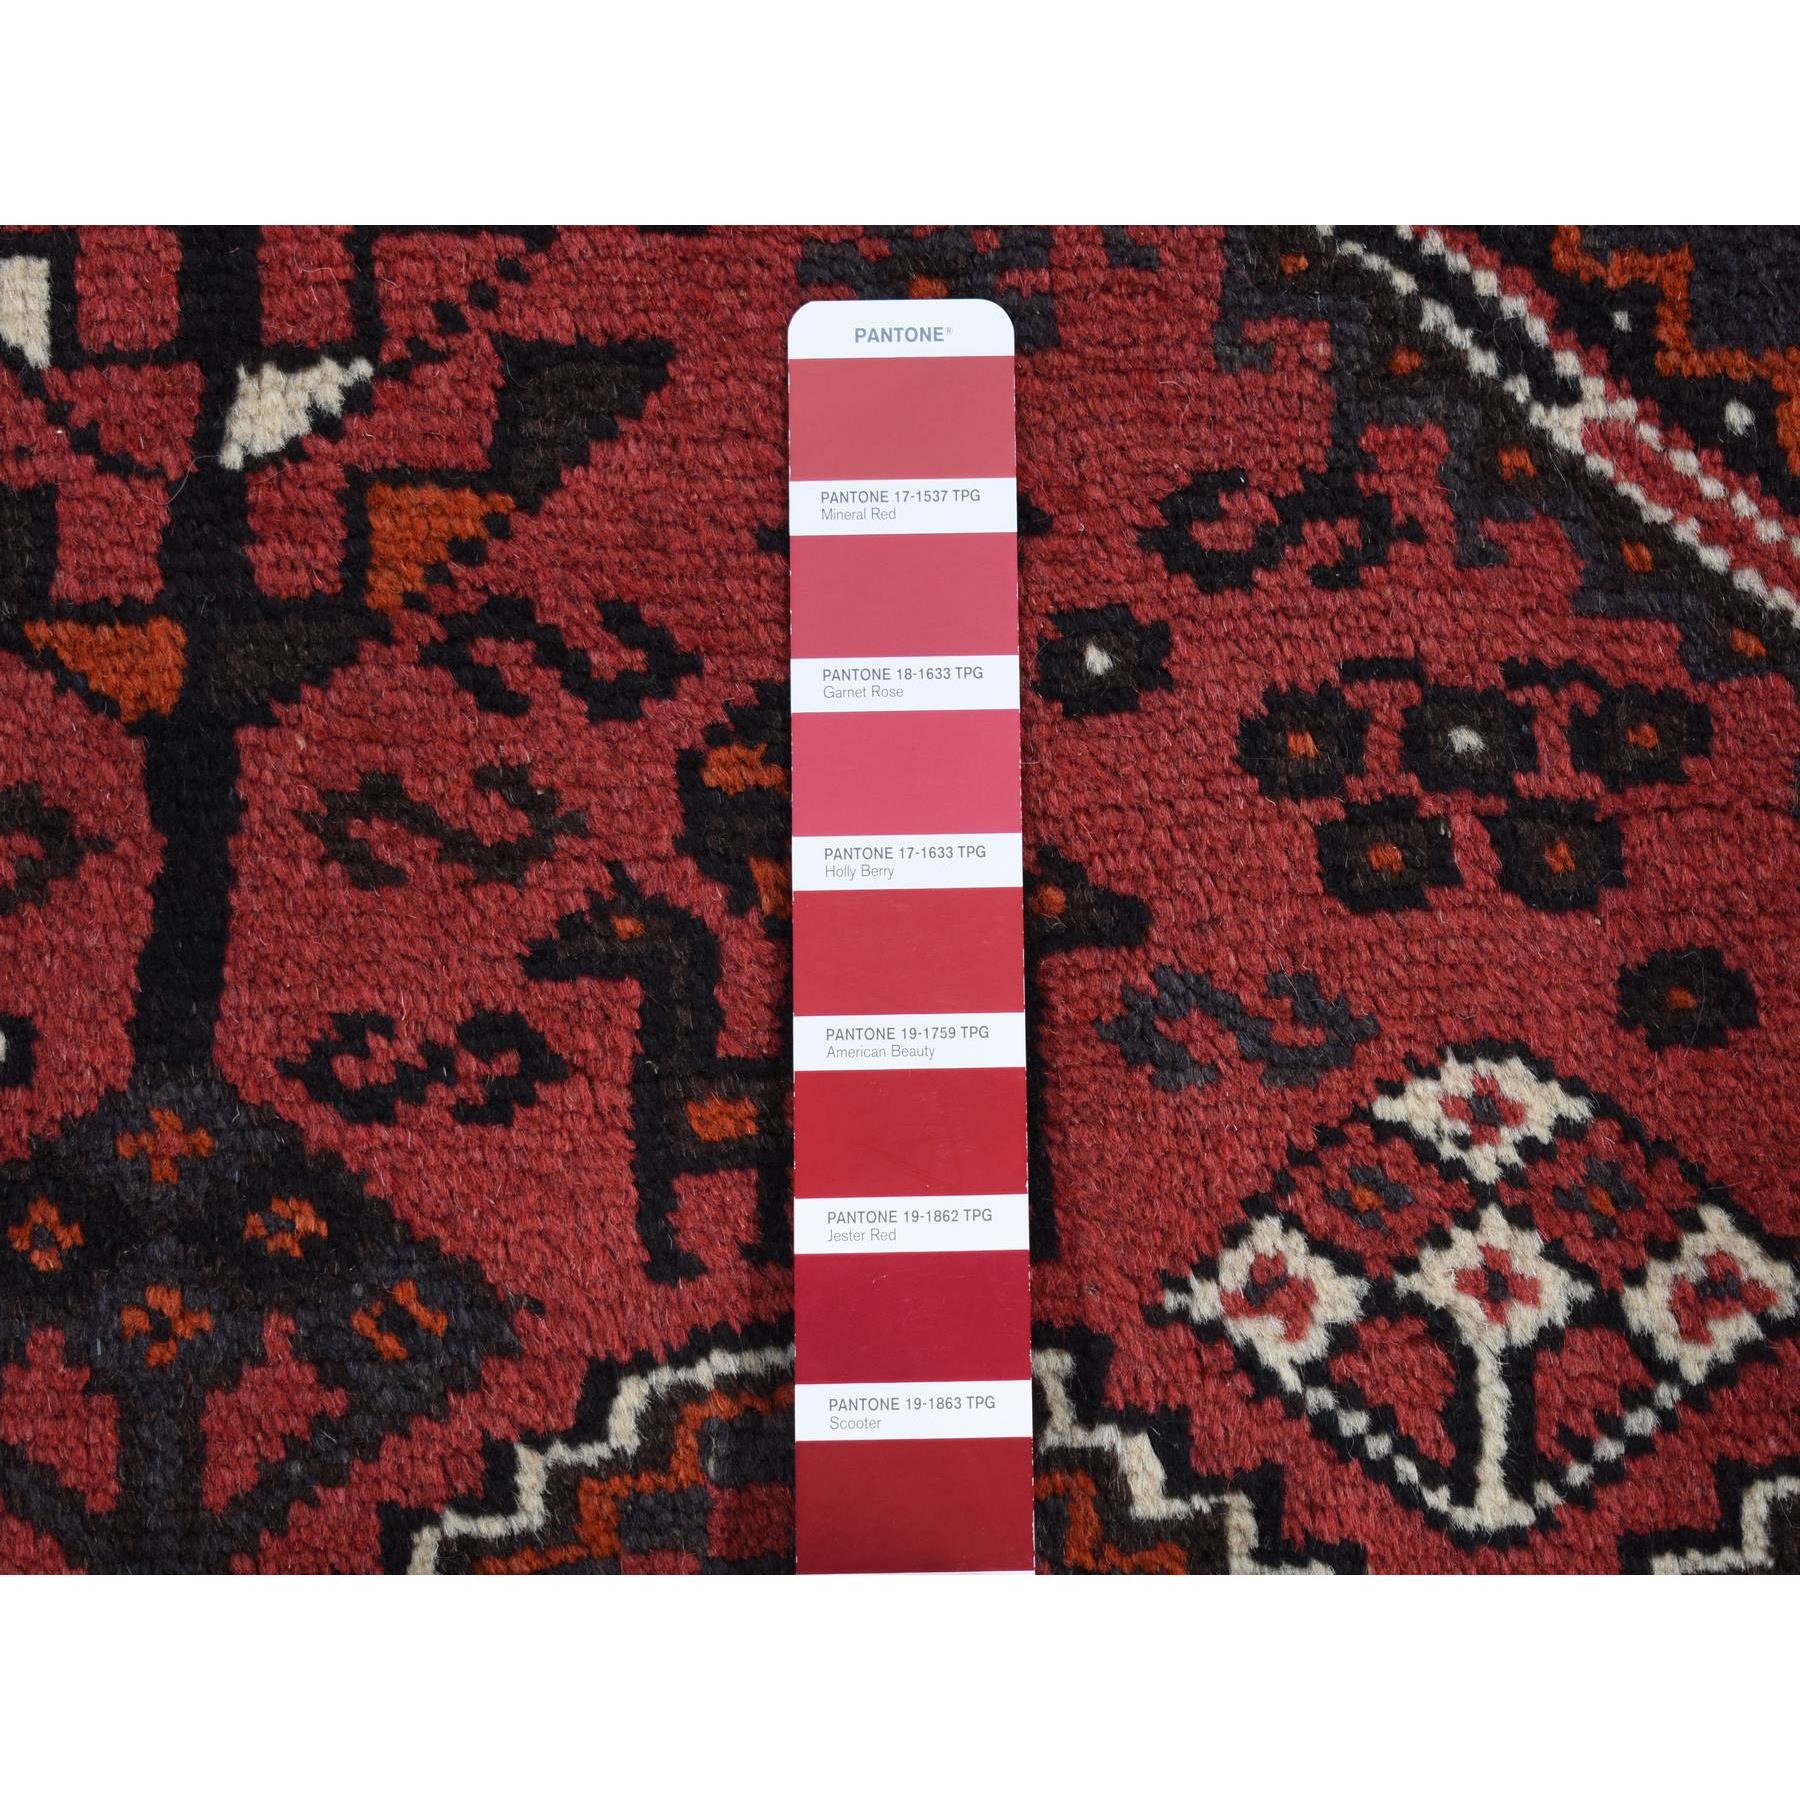 4'8"x6'10" Cardinals Red, New Persian Shiraz, Full Pile, Pure Wool, Hand Woven, Oriental Rug 